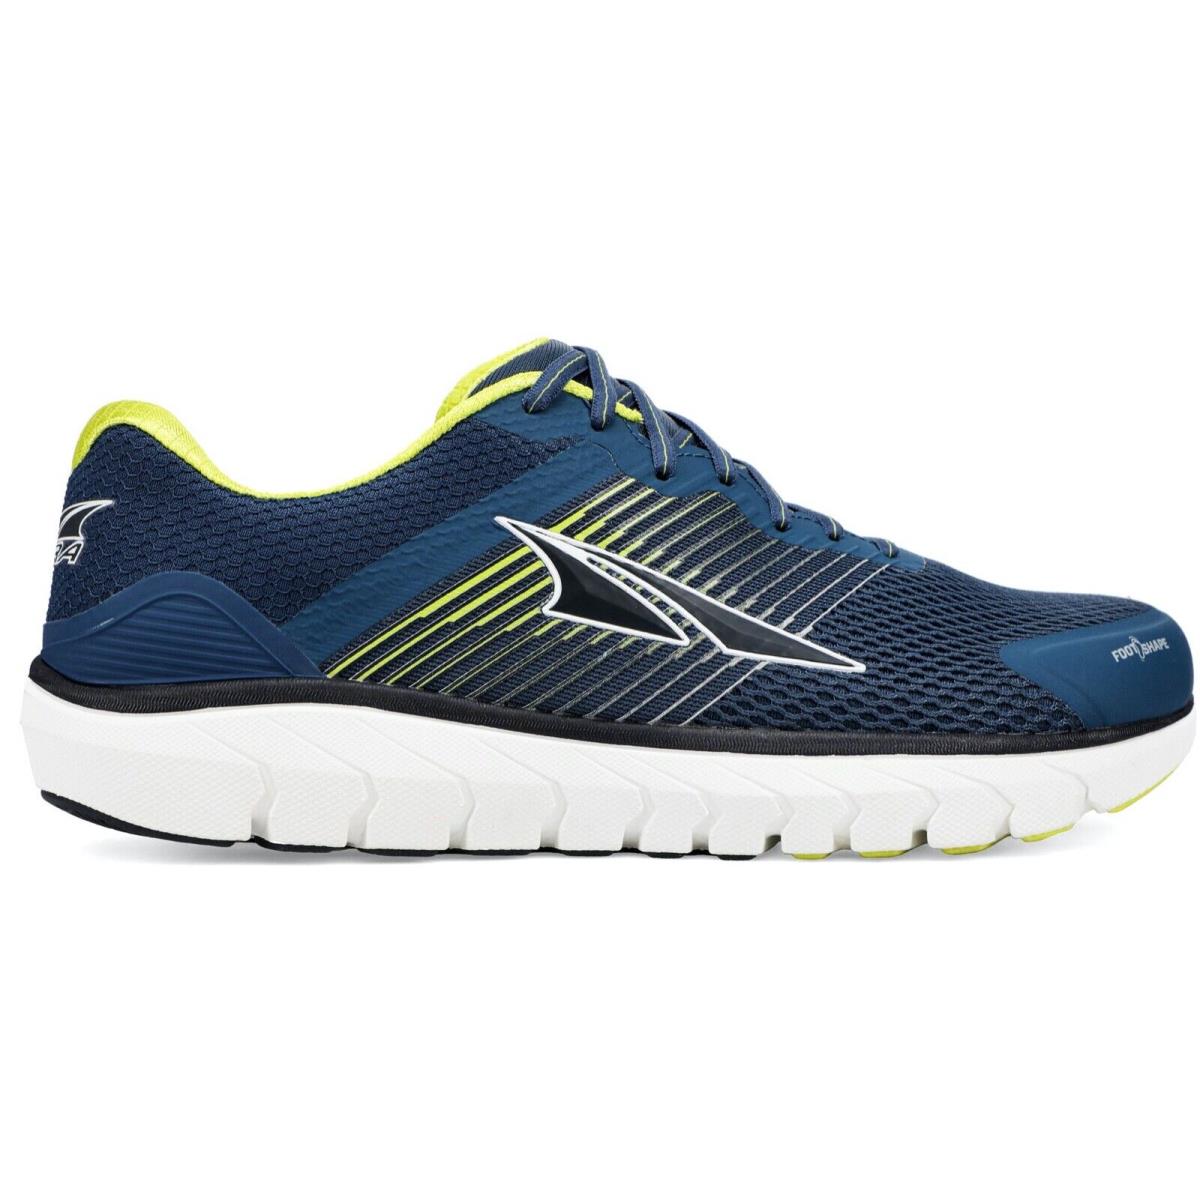 Altra Provision 4 Men`s Road Running Shoes Blue/lime ALOA4PEA431 US Size 11 - Blue/Lime